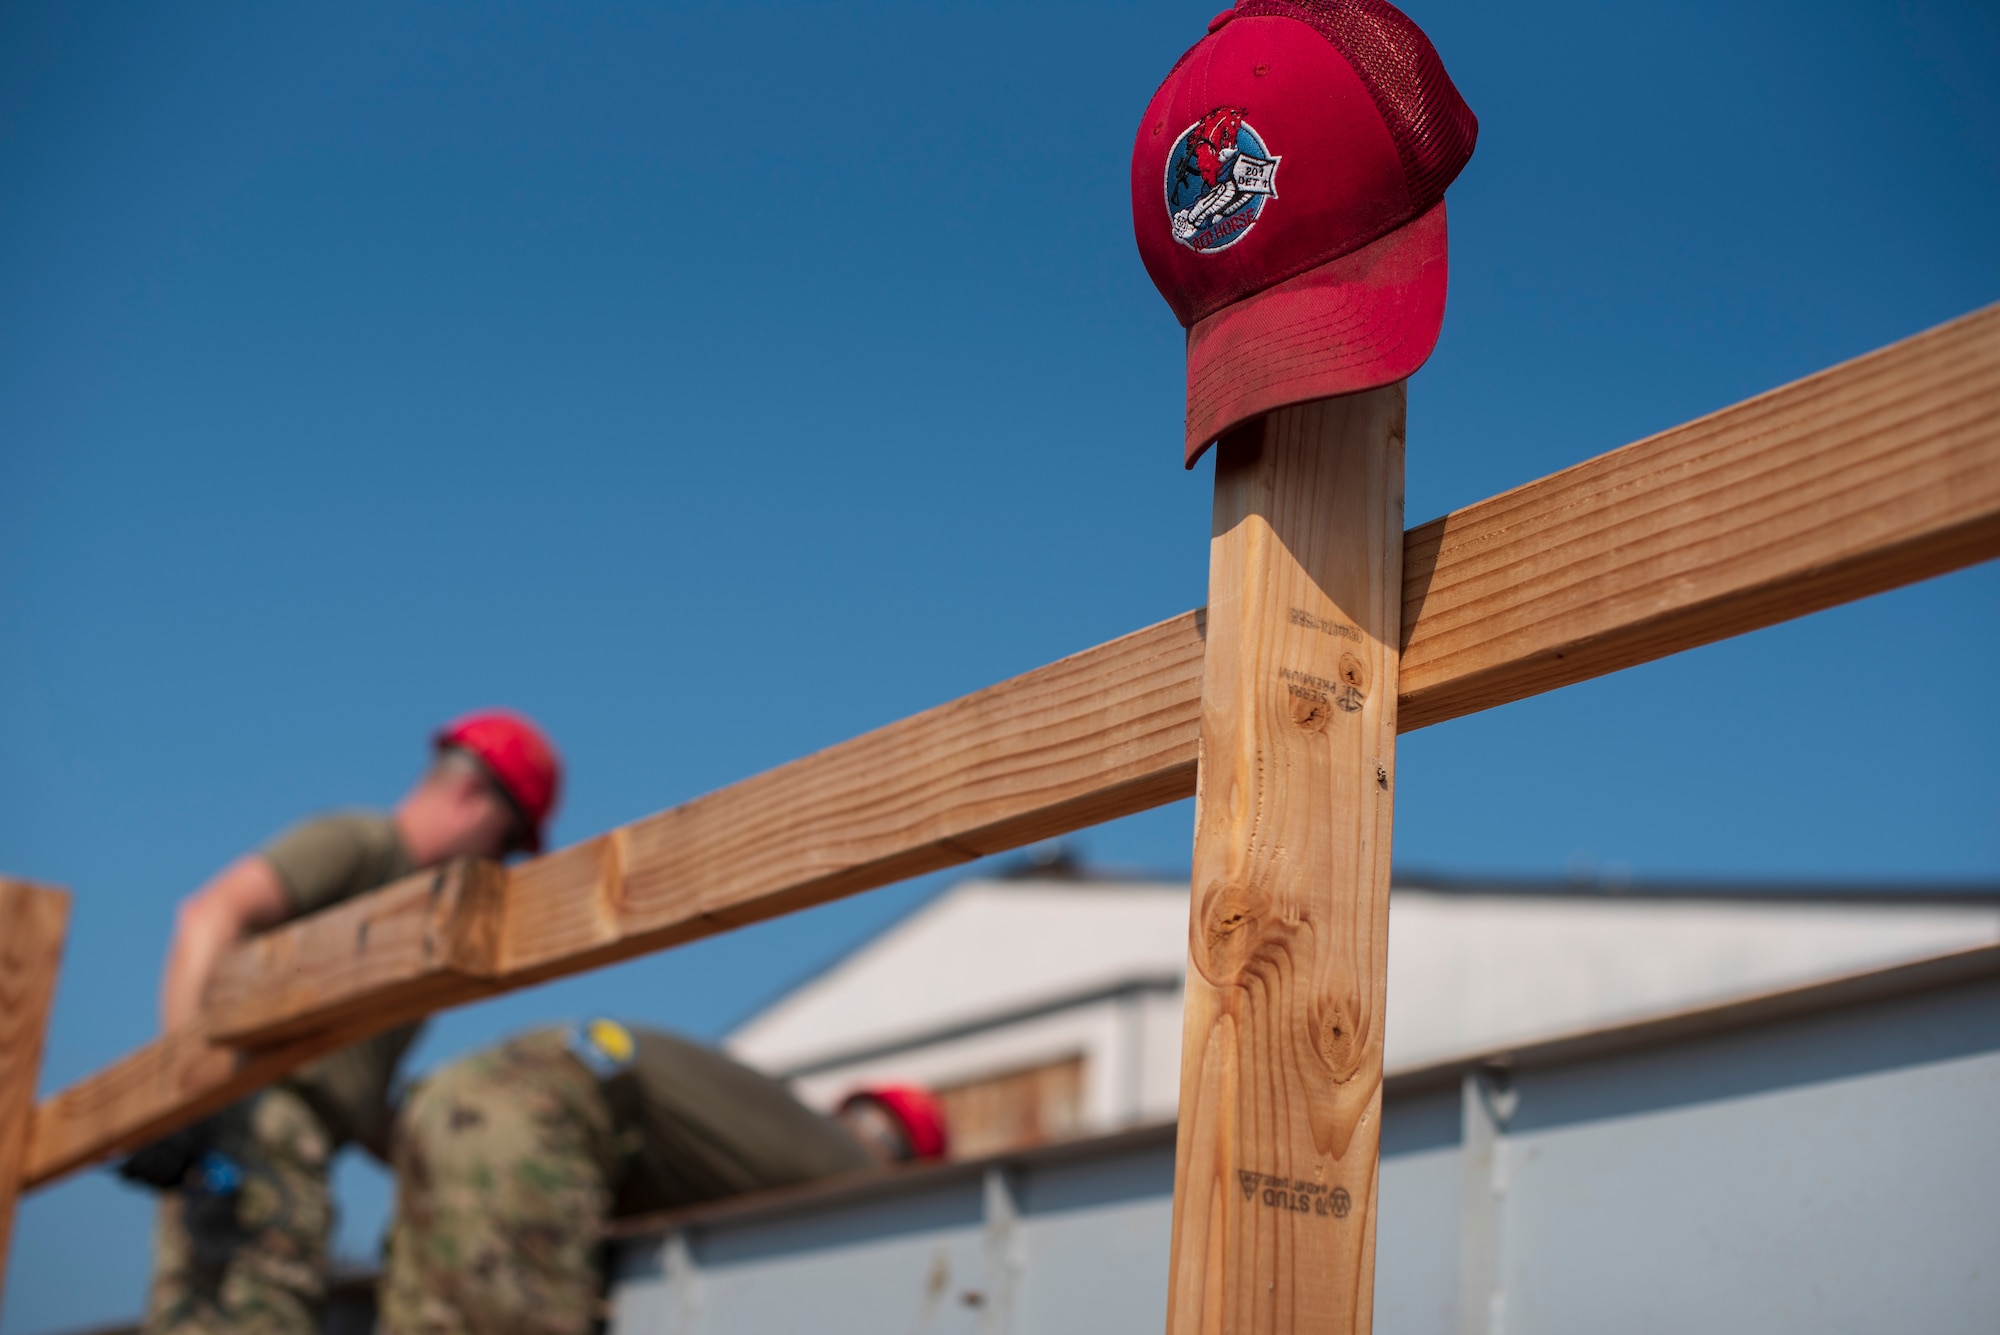 A red RED HORSE cap rests on a wooden rail while two men work in the background.